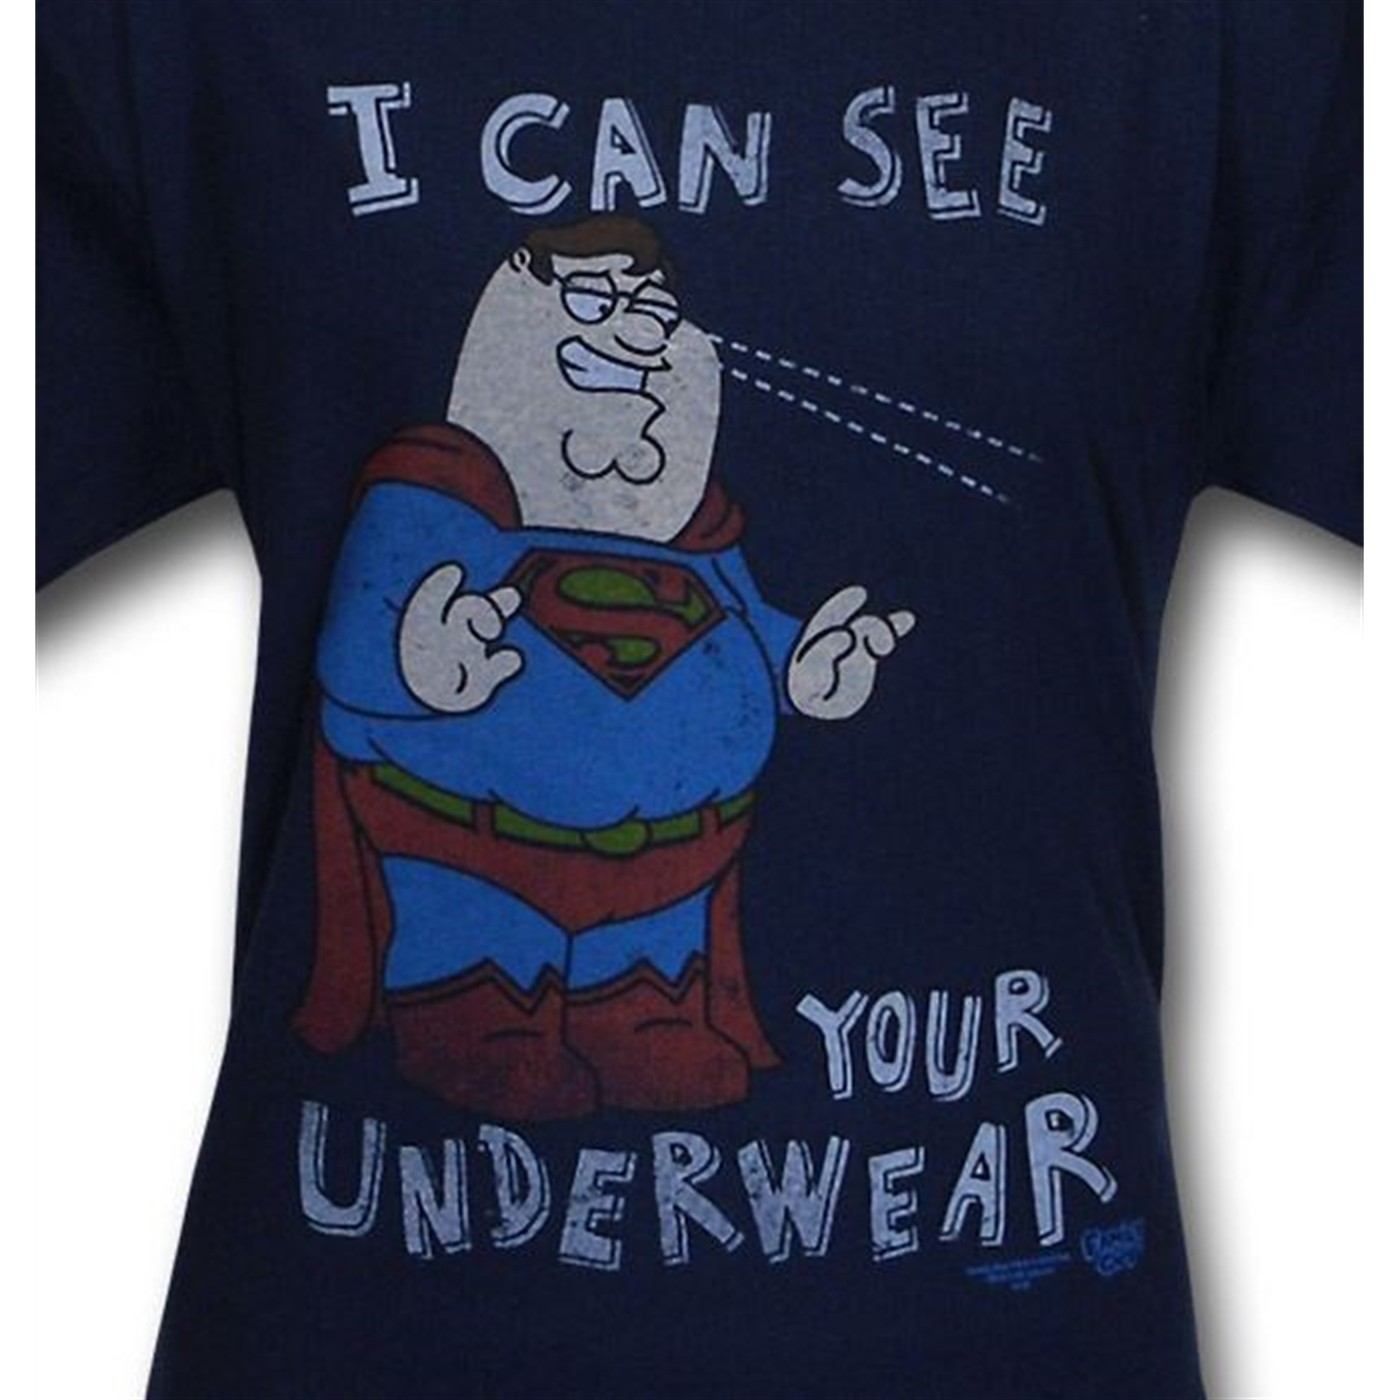 Family Guy Super Peter: I See Your Underwear